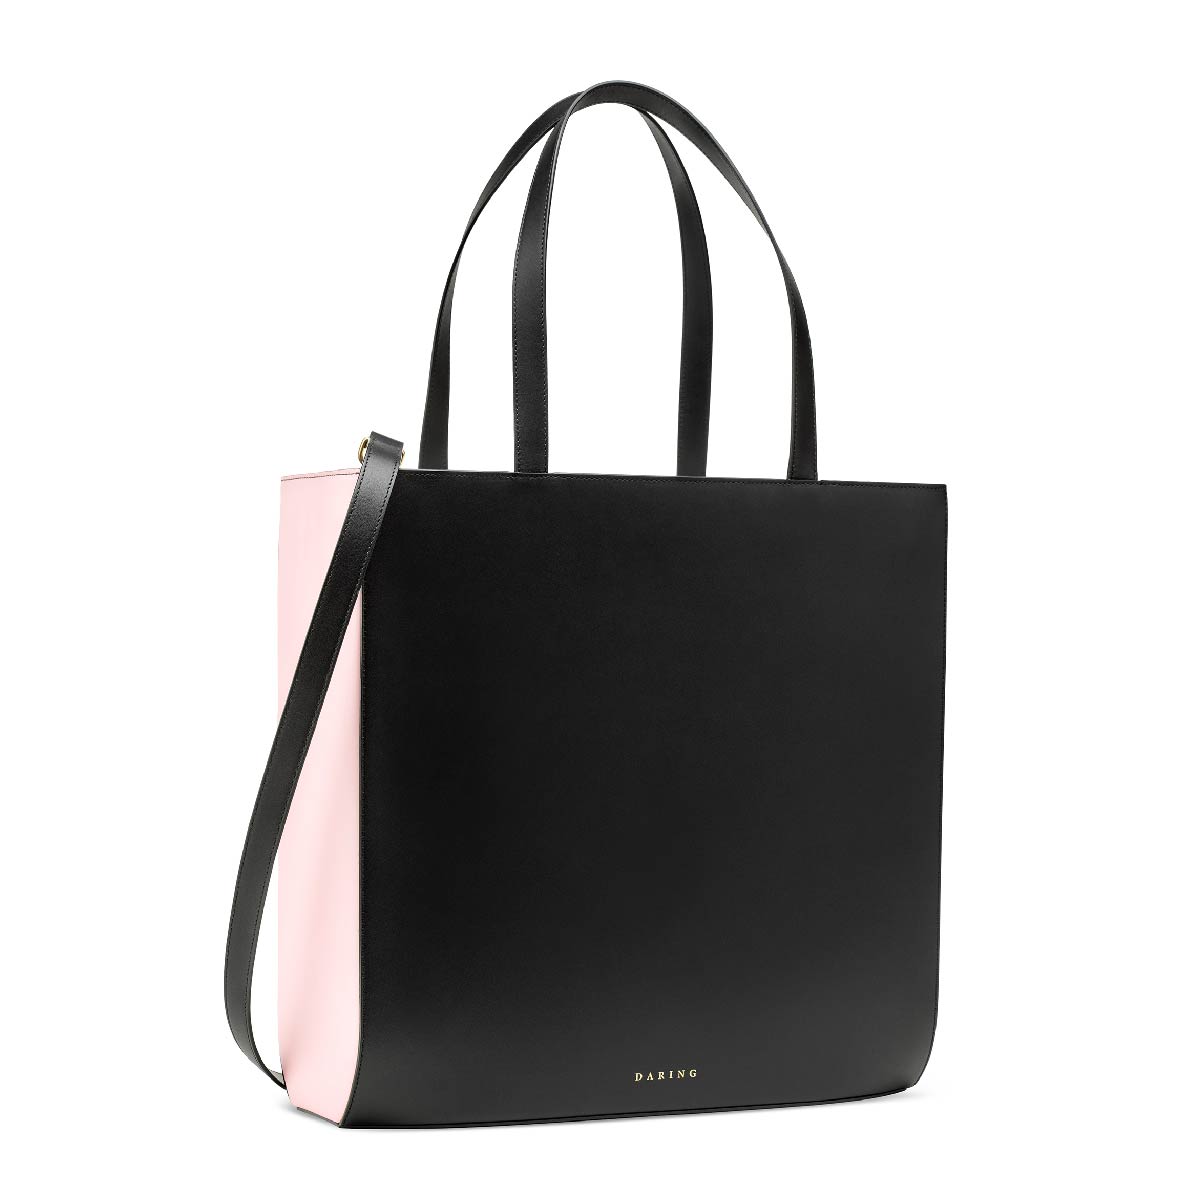 The Tote in Black + Pink, with removable strap and top handles, three quarter view.